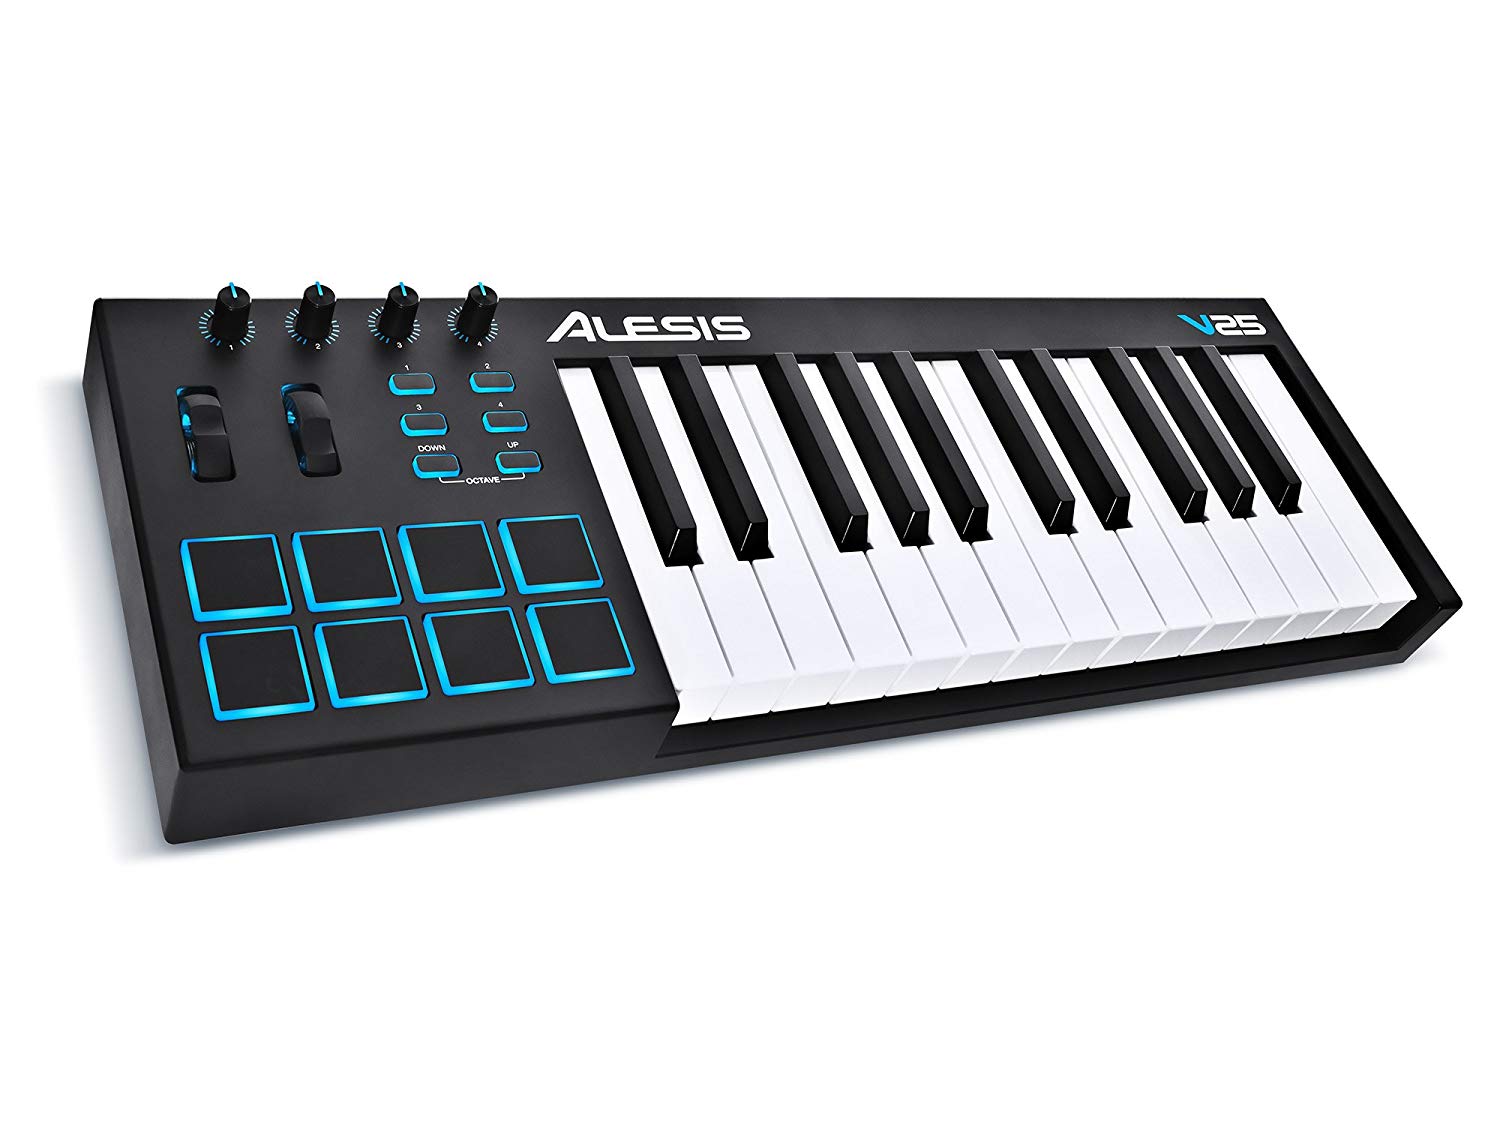 Alesis V25 | 25-Key USB MIDI Keyboard & Drum Pad Controller (8 Pads/4 Knobs/4 Buttons)